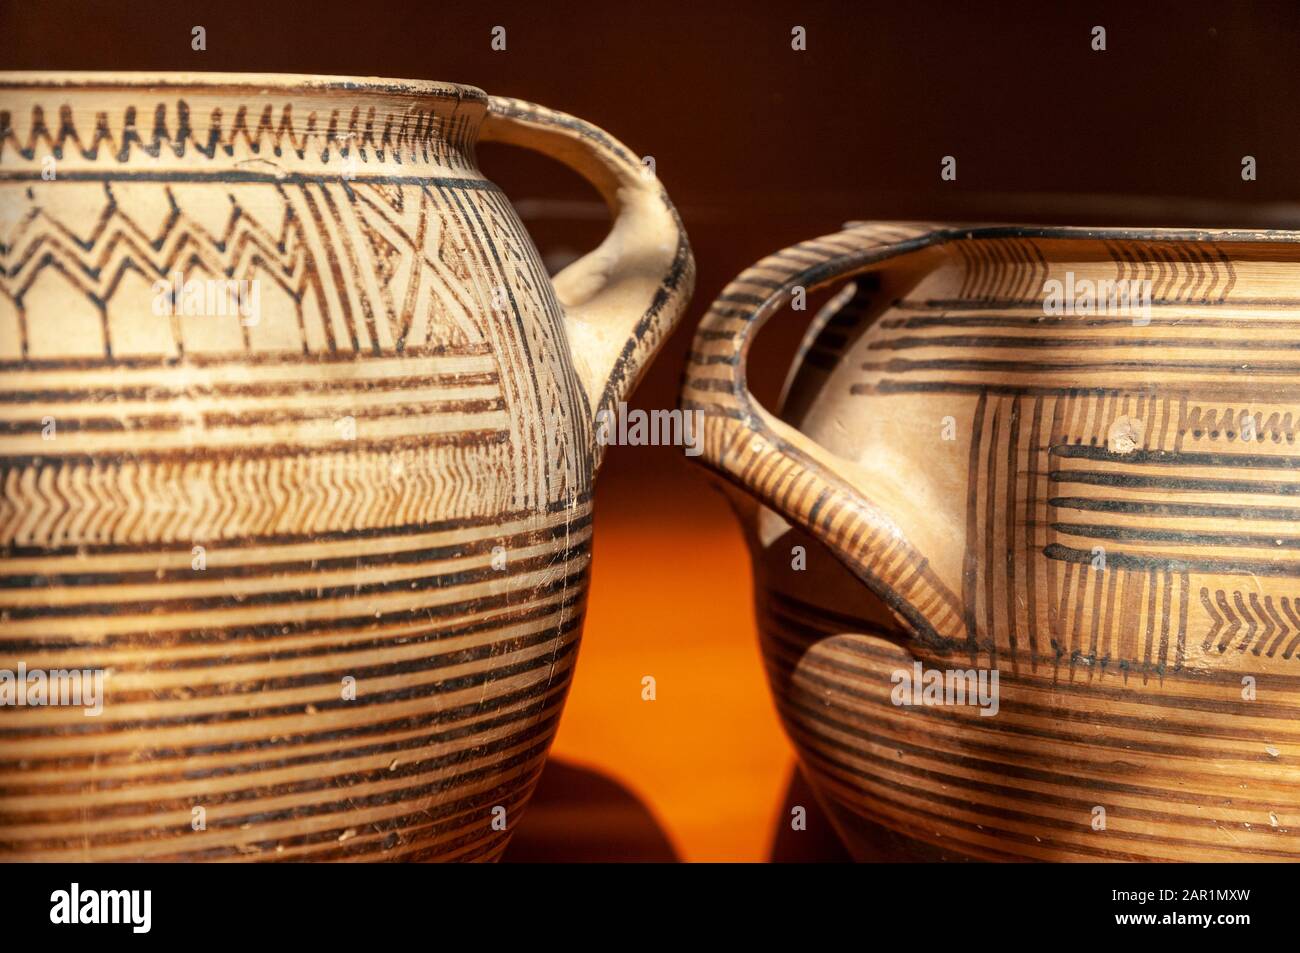 A museum display of early Greek ceramics, Geometric Kraters, funerary urns, from 750-720bc.  from graves at Ancient Corinth, Peloponnese, Greece. Stock Photo